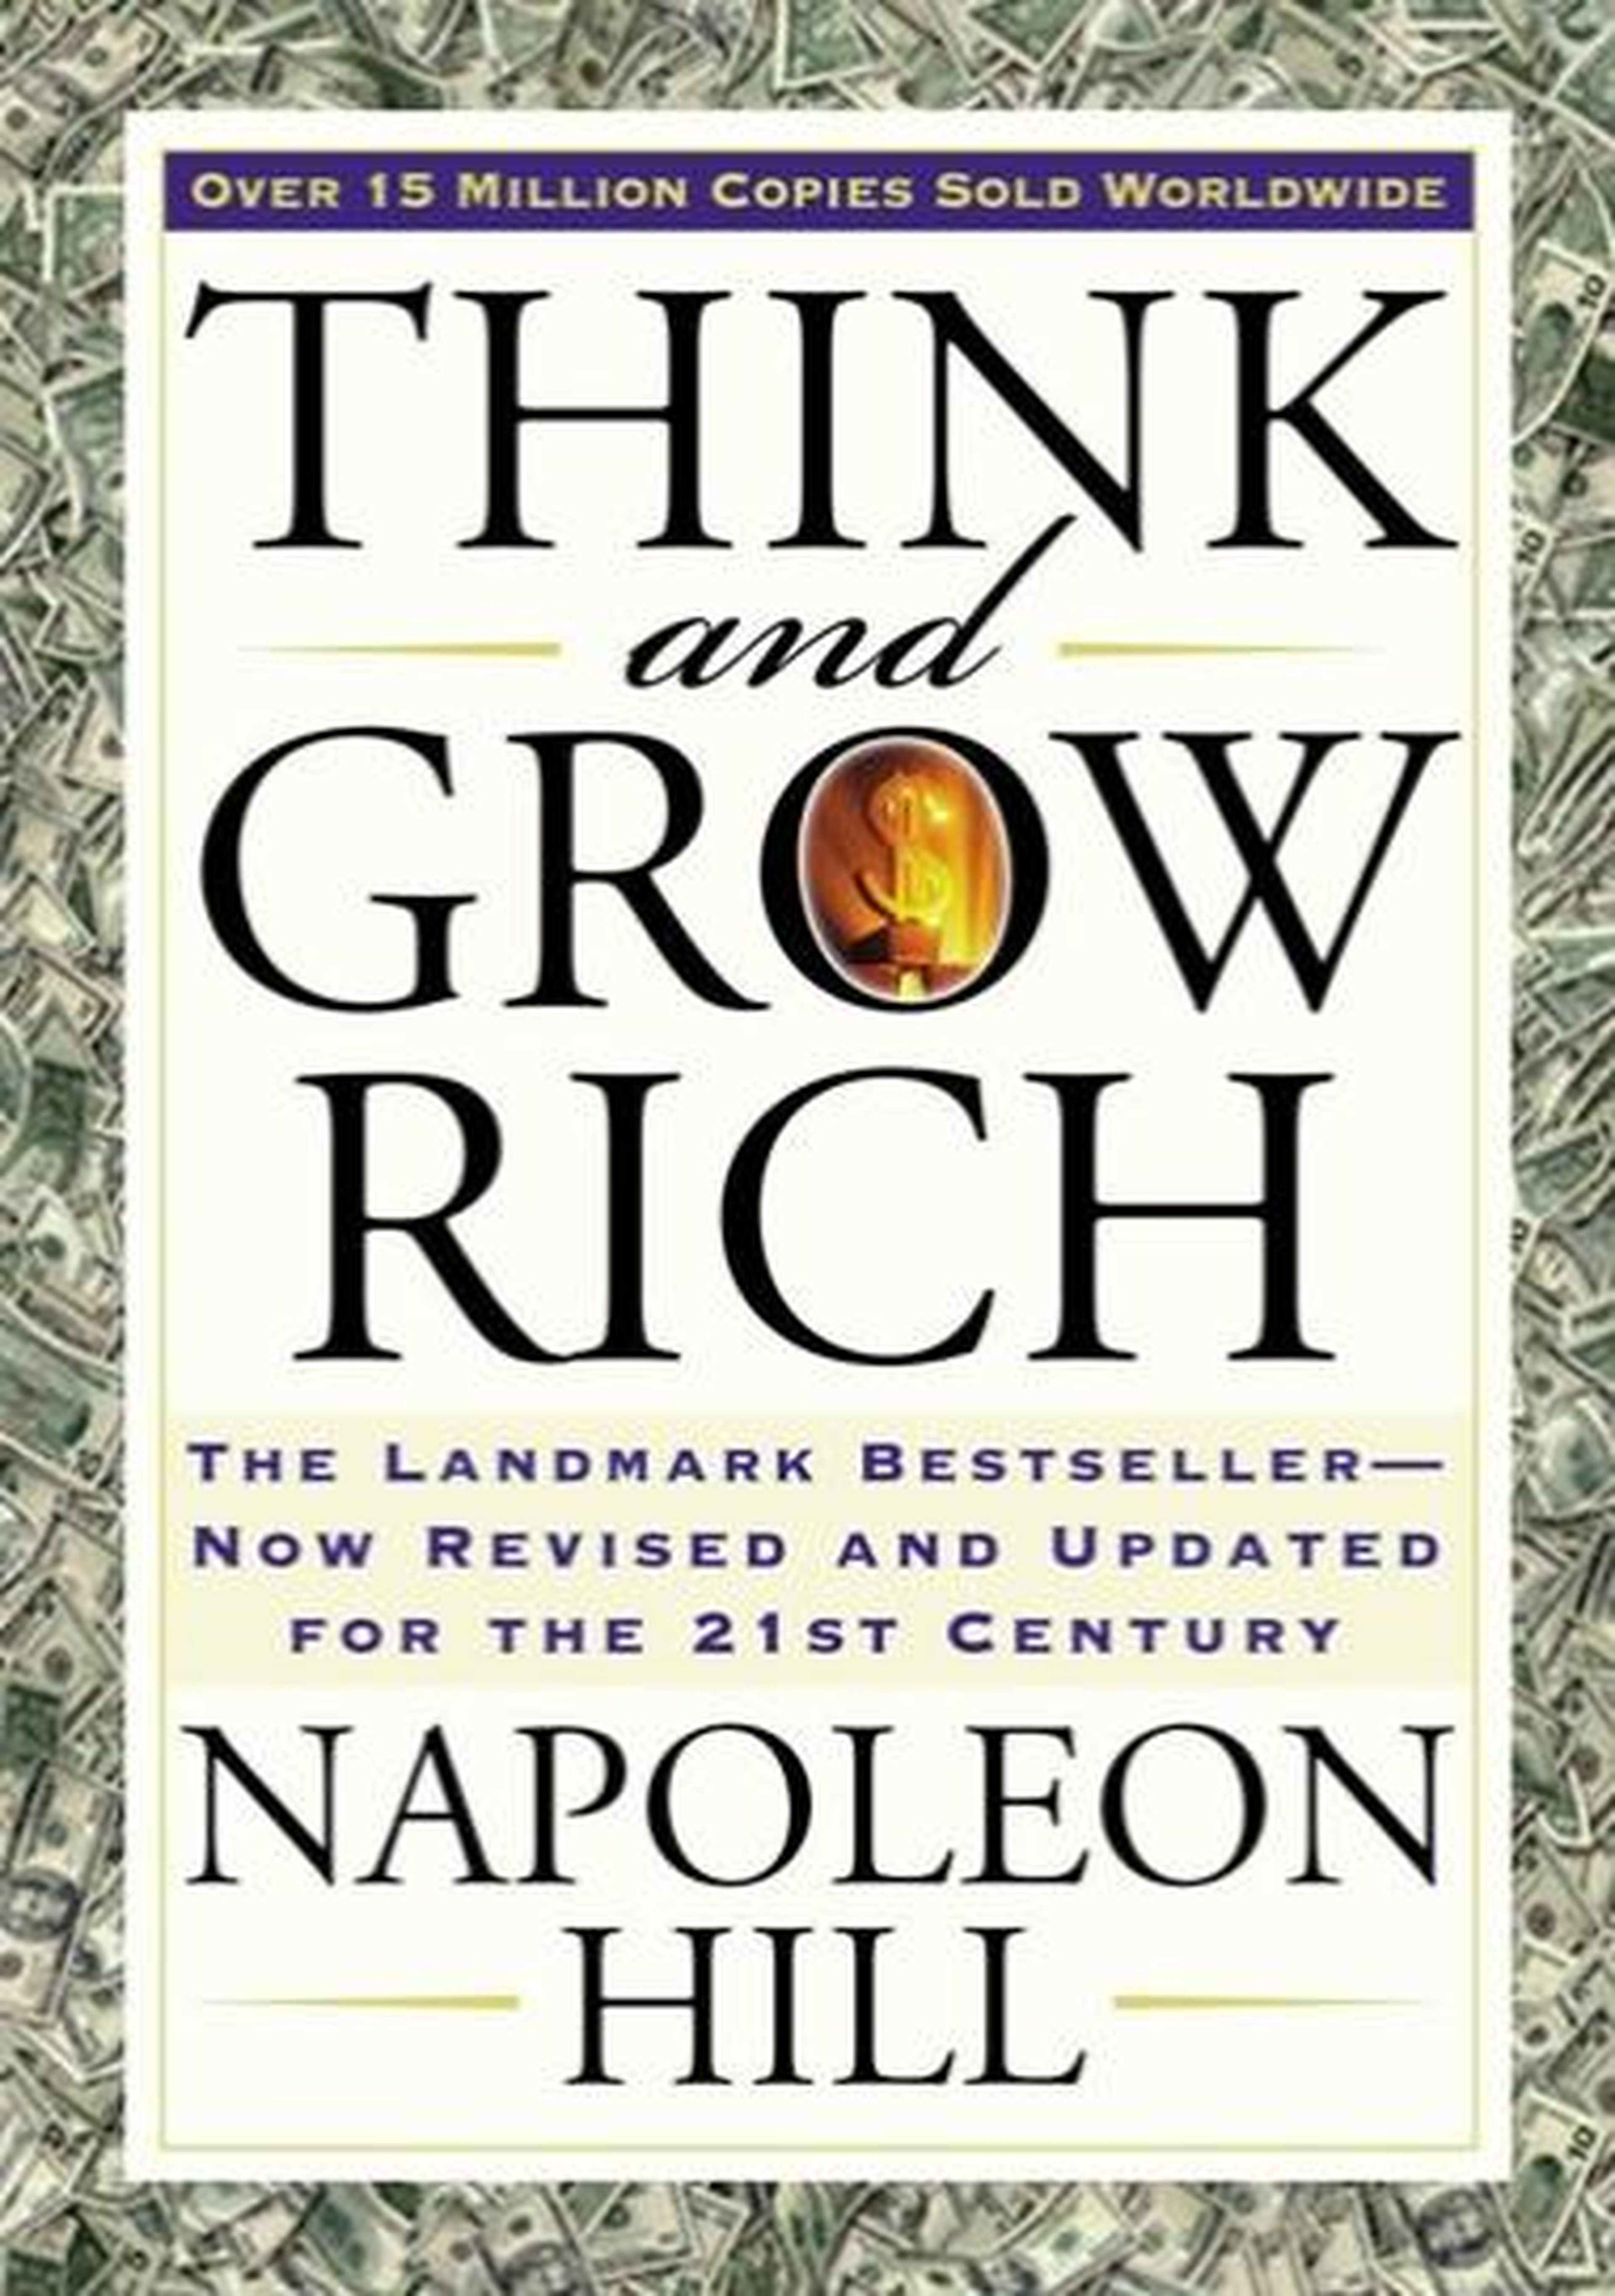 A revised version of the 1937 "Think and Grow Rich" original.